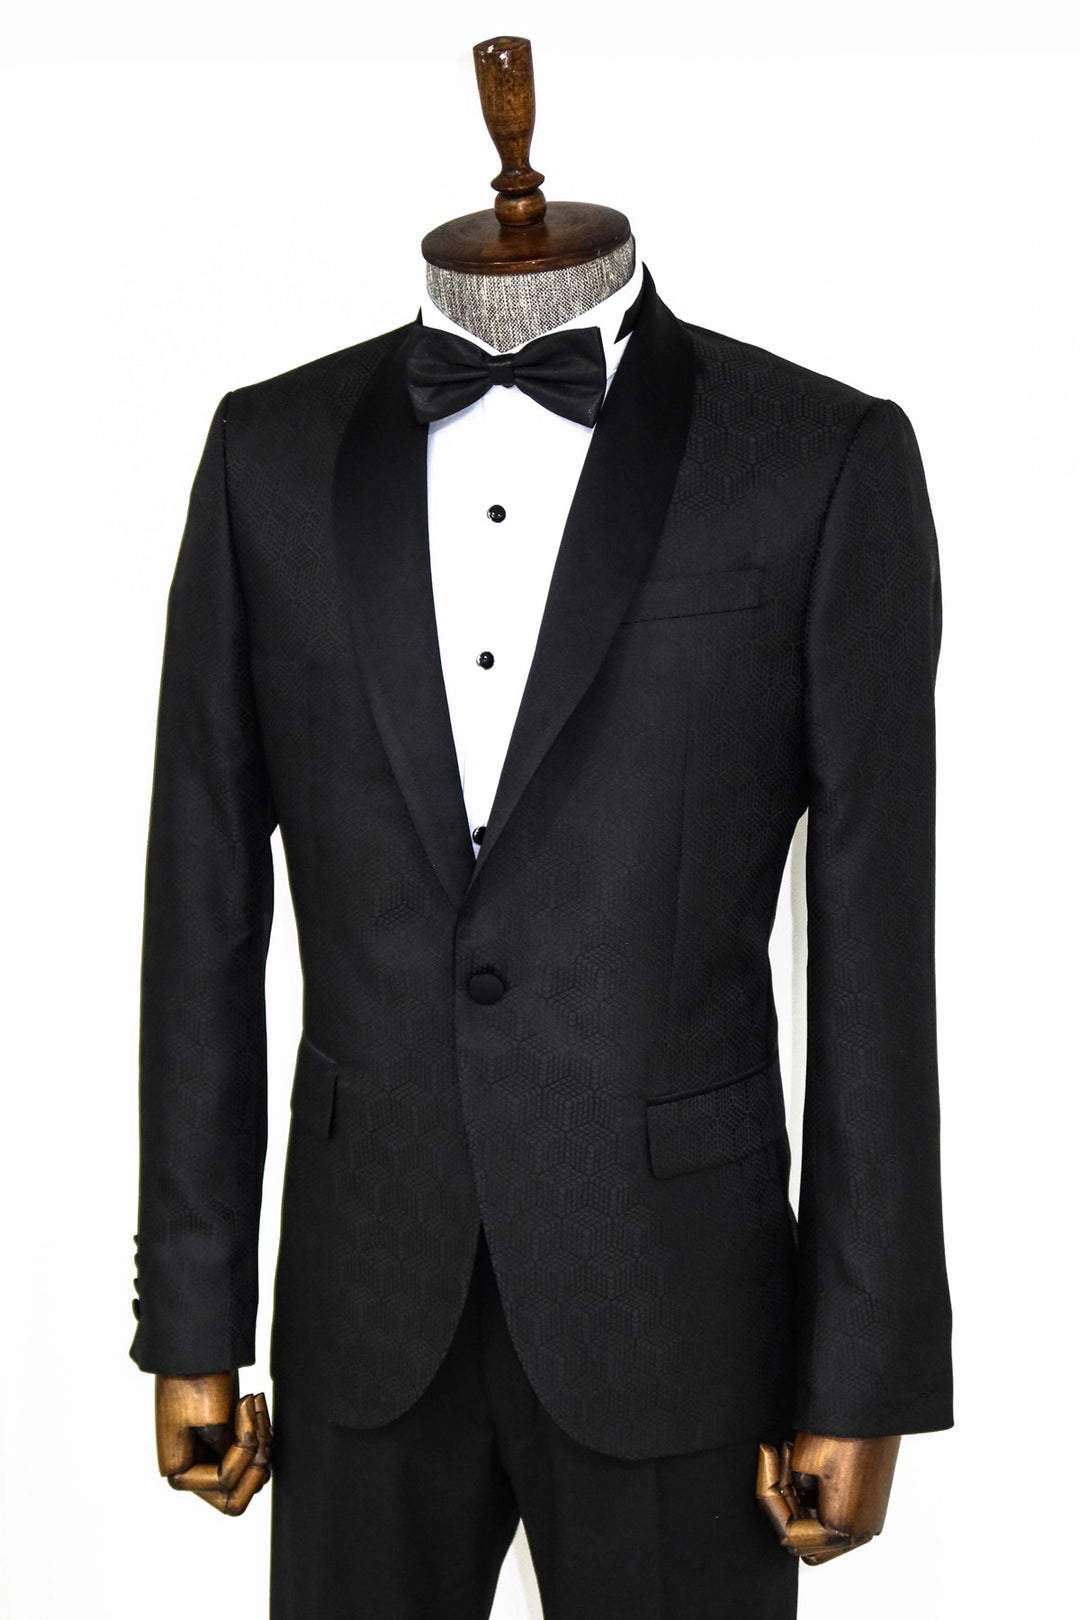 Pentagon Patterned Shawl Lapel Black Men Prom Blazer and Trousers Combination - Wessi